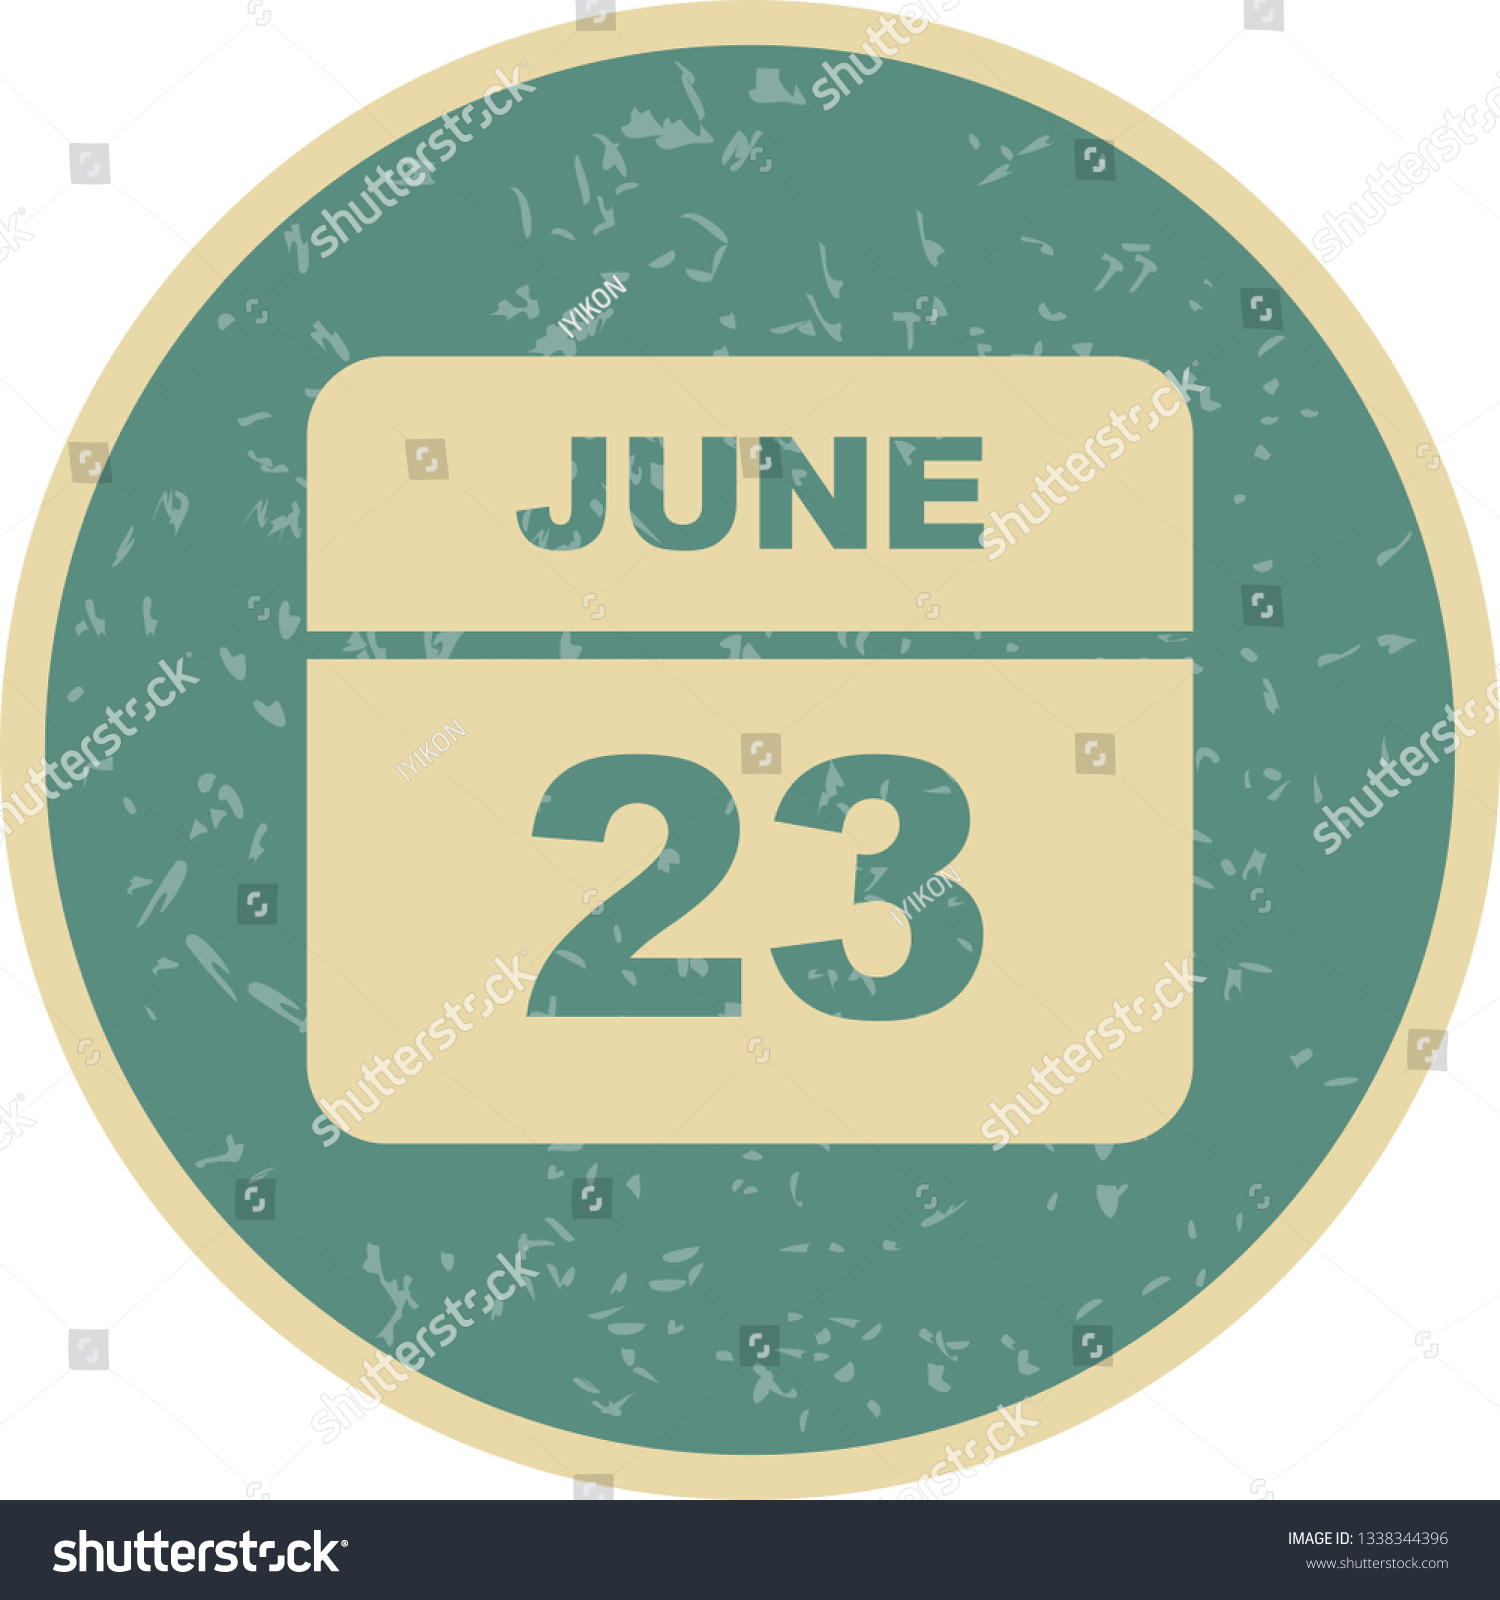 June 23rd Date on a Single Day Calendar Royalty Free Stock Vector